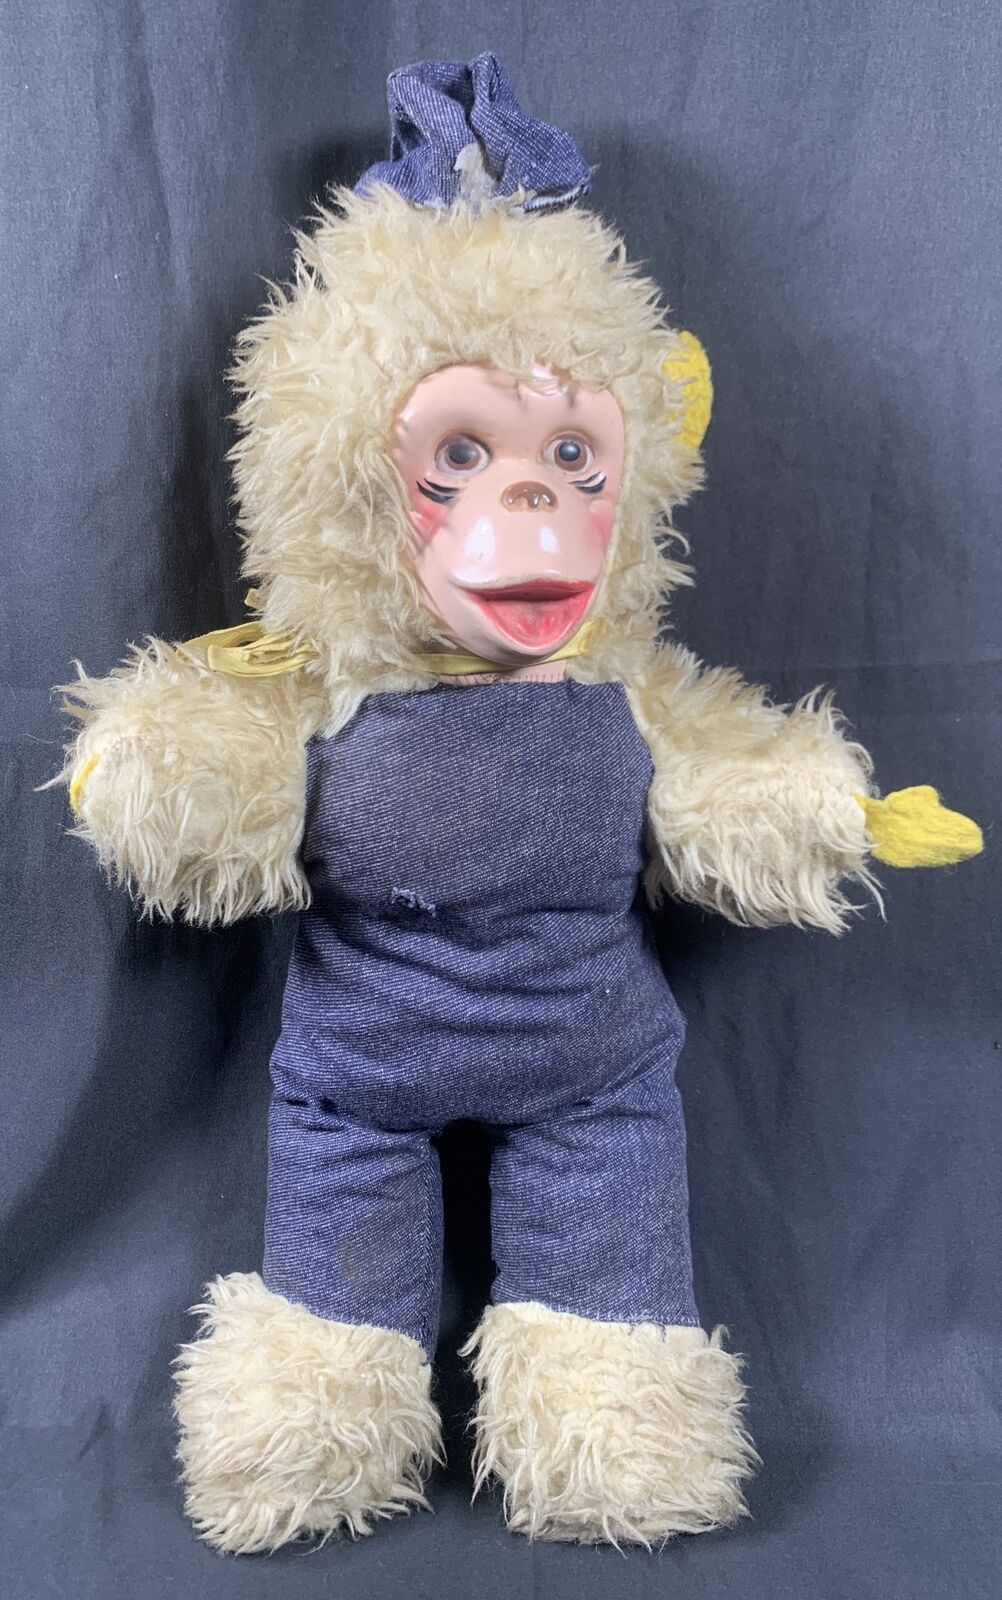 ✨Vintage 1960s Carnival Prize Rubber Faced Plush Circus Monkey 20” Tall✨